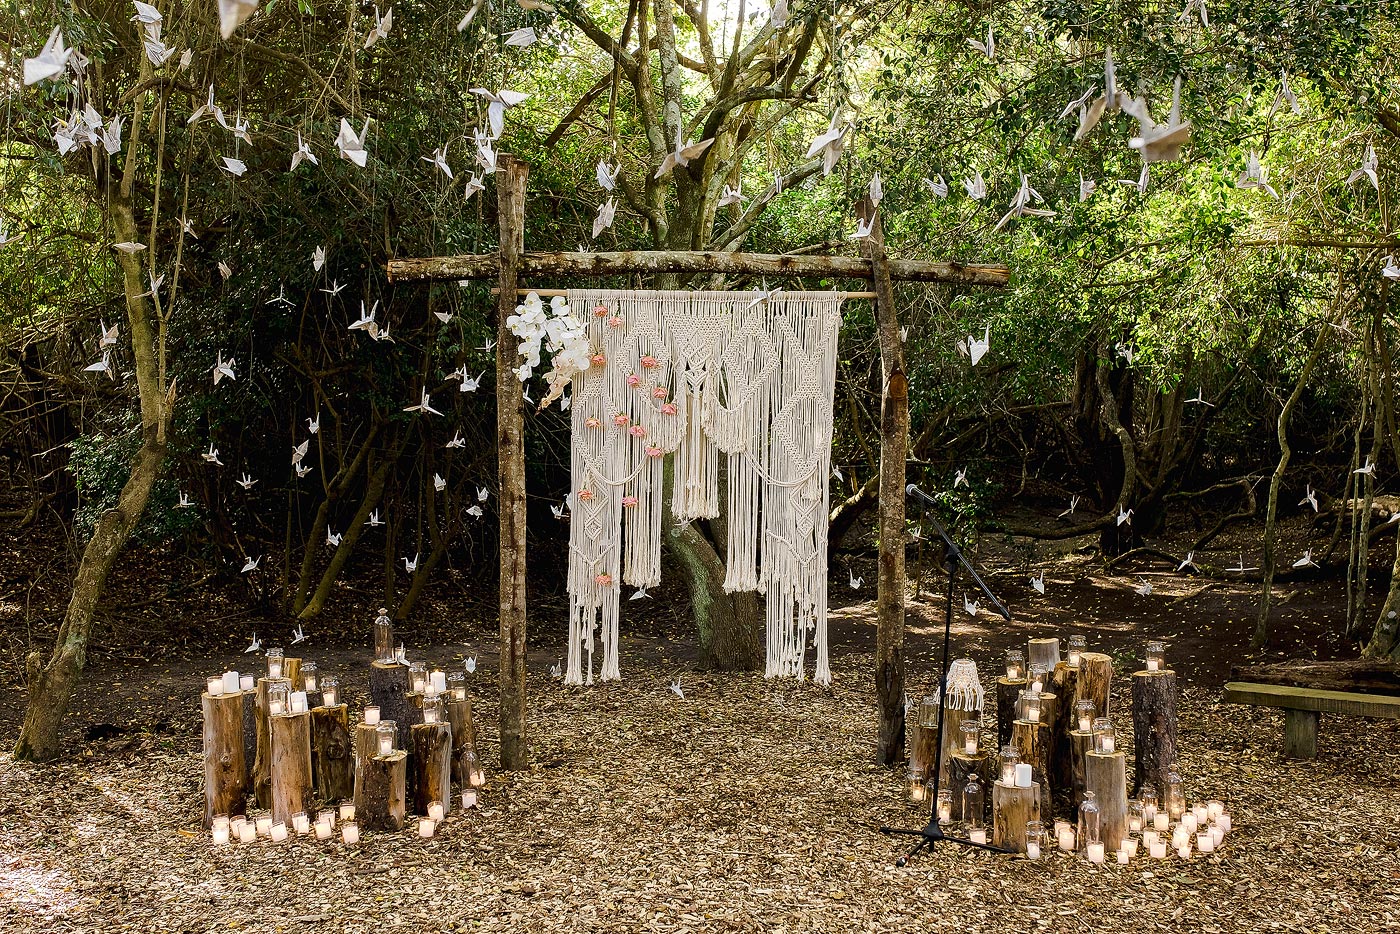 Forest Wedding Decor and Altar with decorations and paper origami cranes.